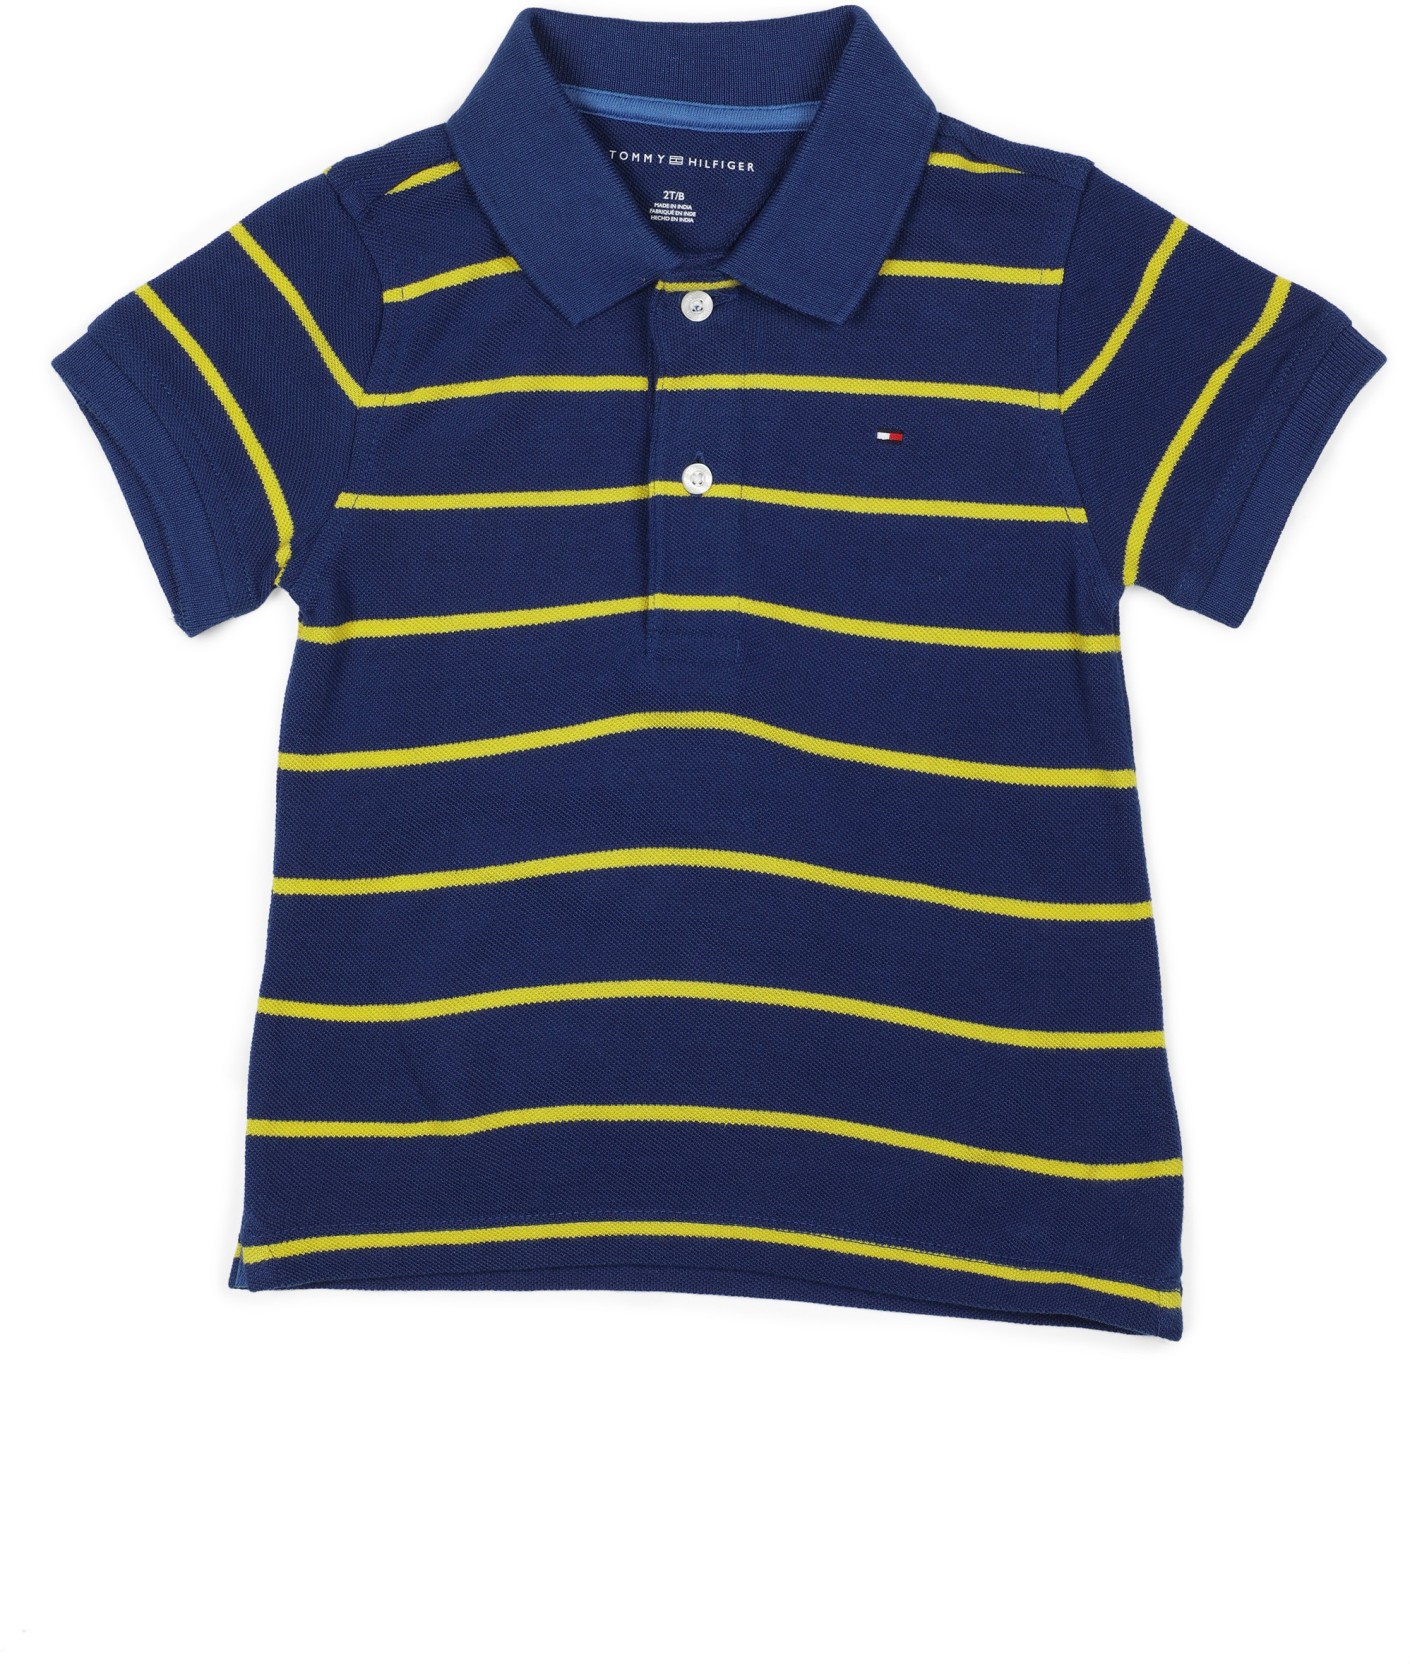 tommy hilfiger baby clothes india